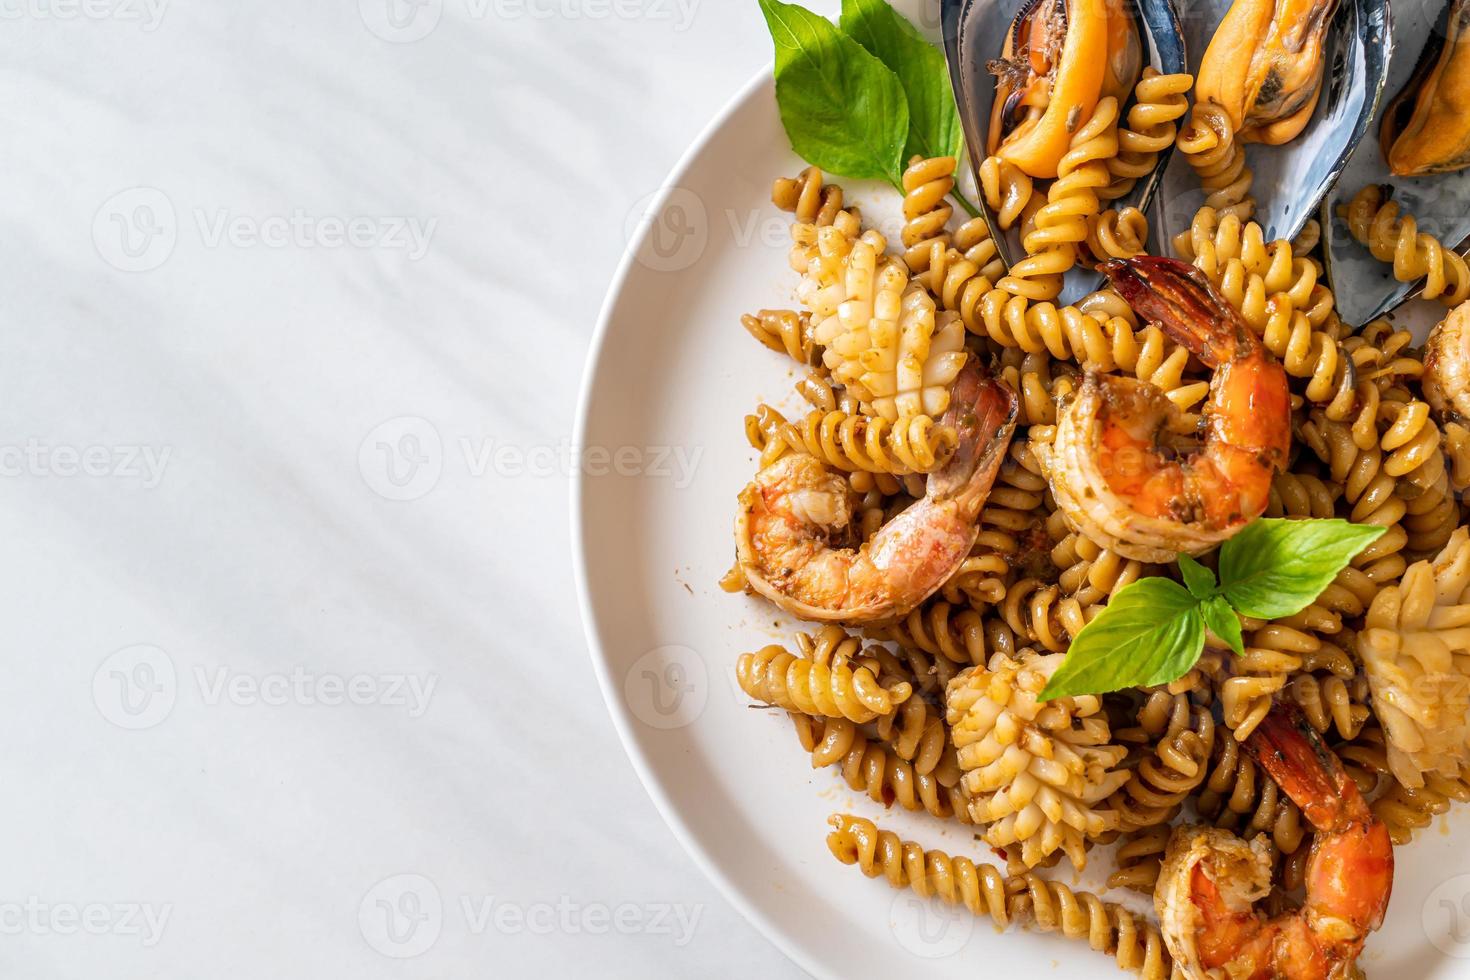 Stir-fried spiral pasta with seafood and basil sauce - fusion food style photo